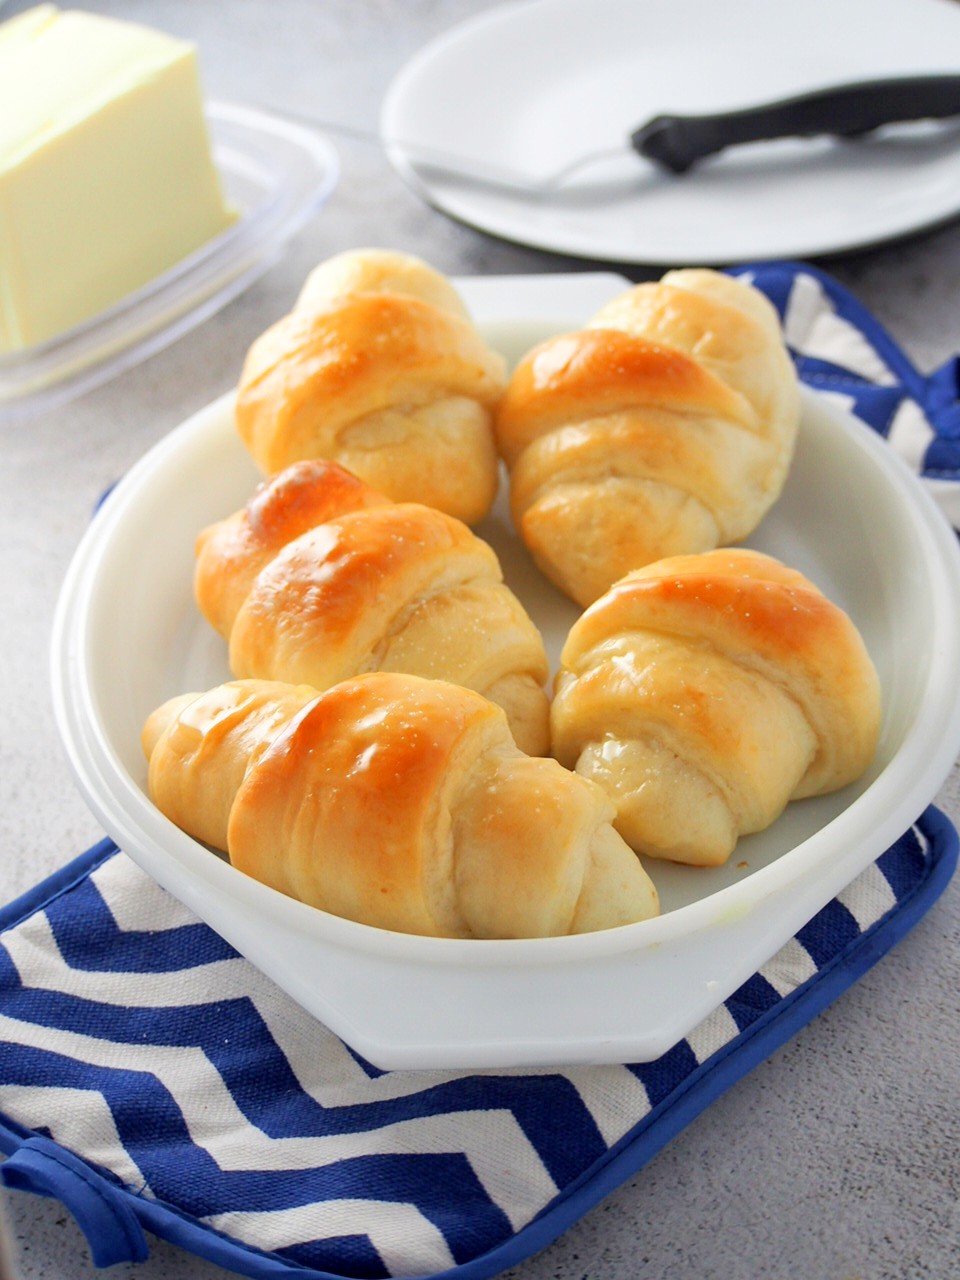 Salted butter rolls served on the table.